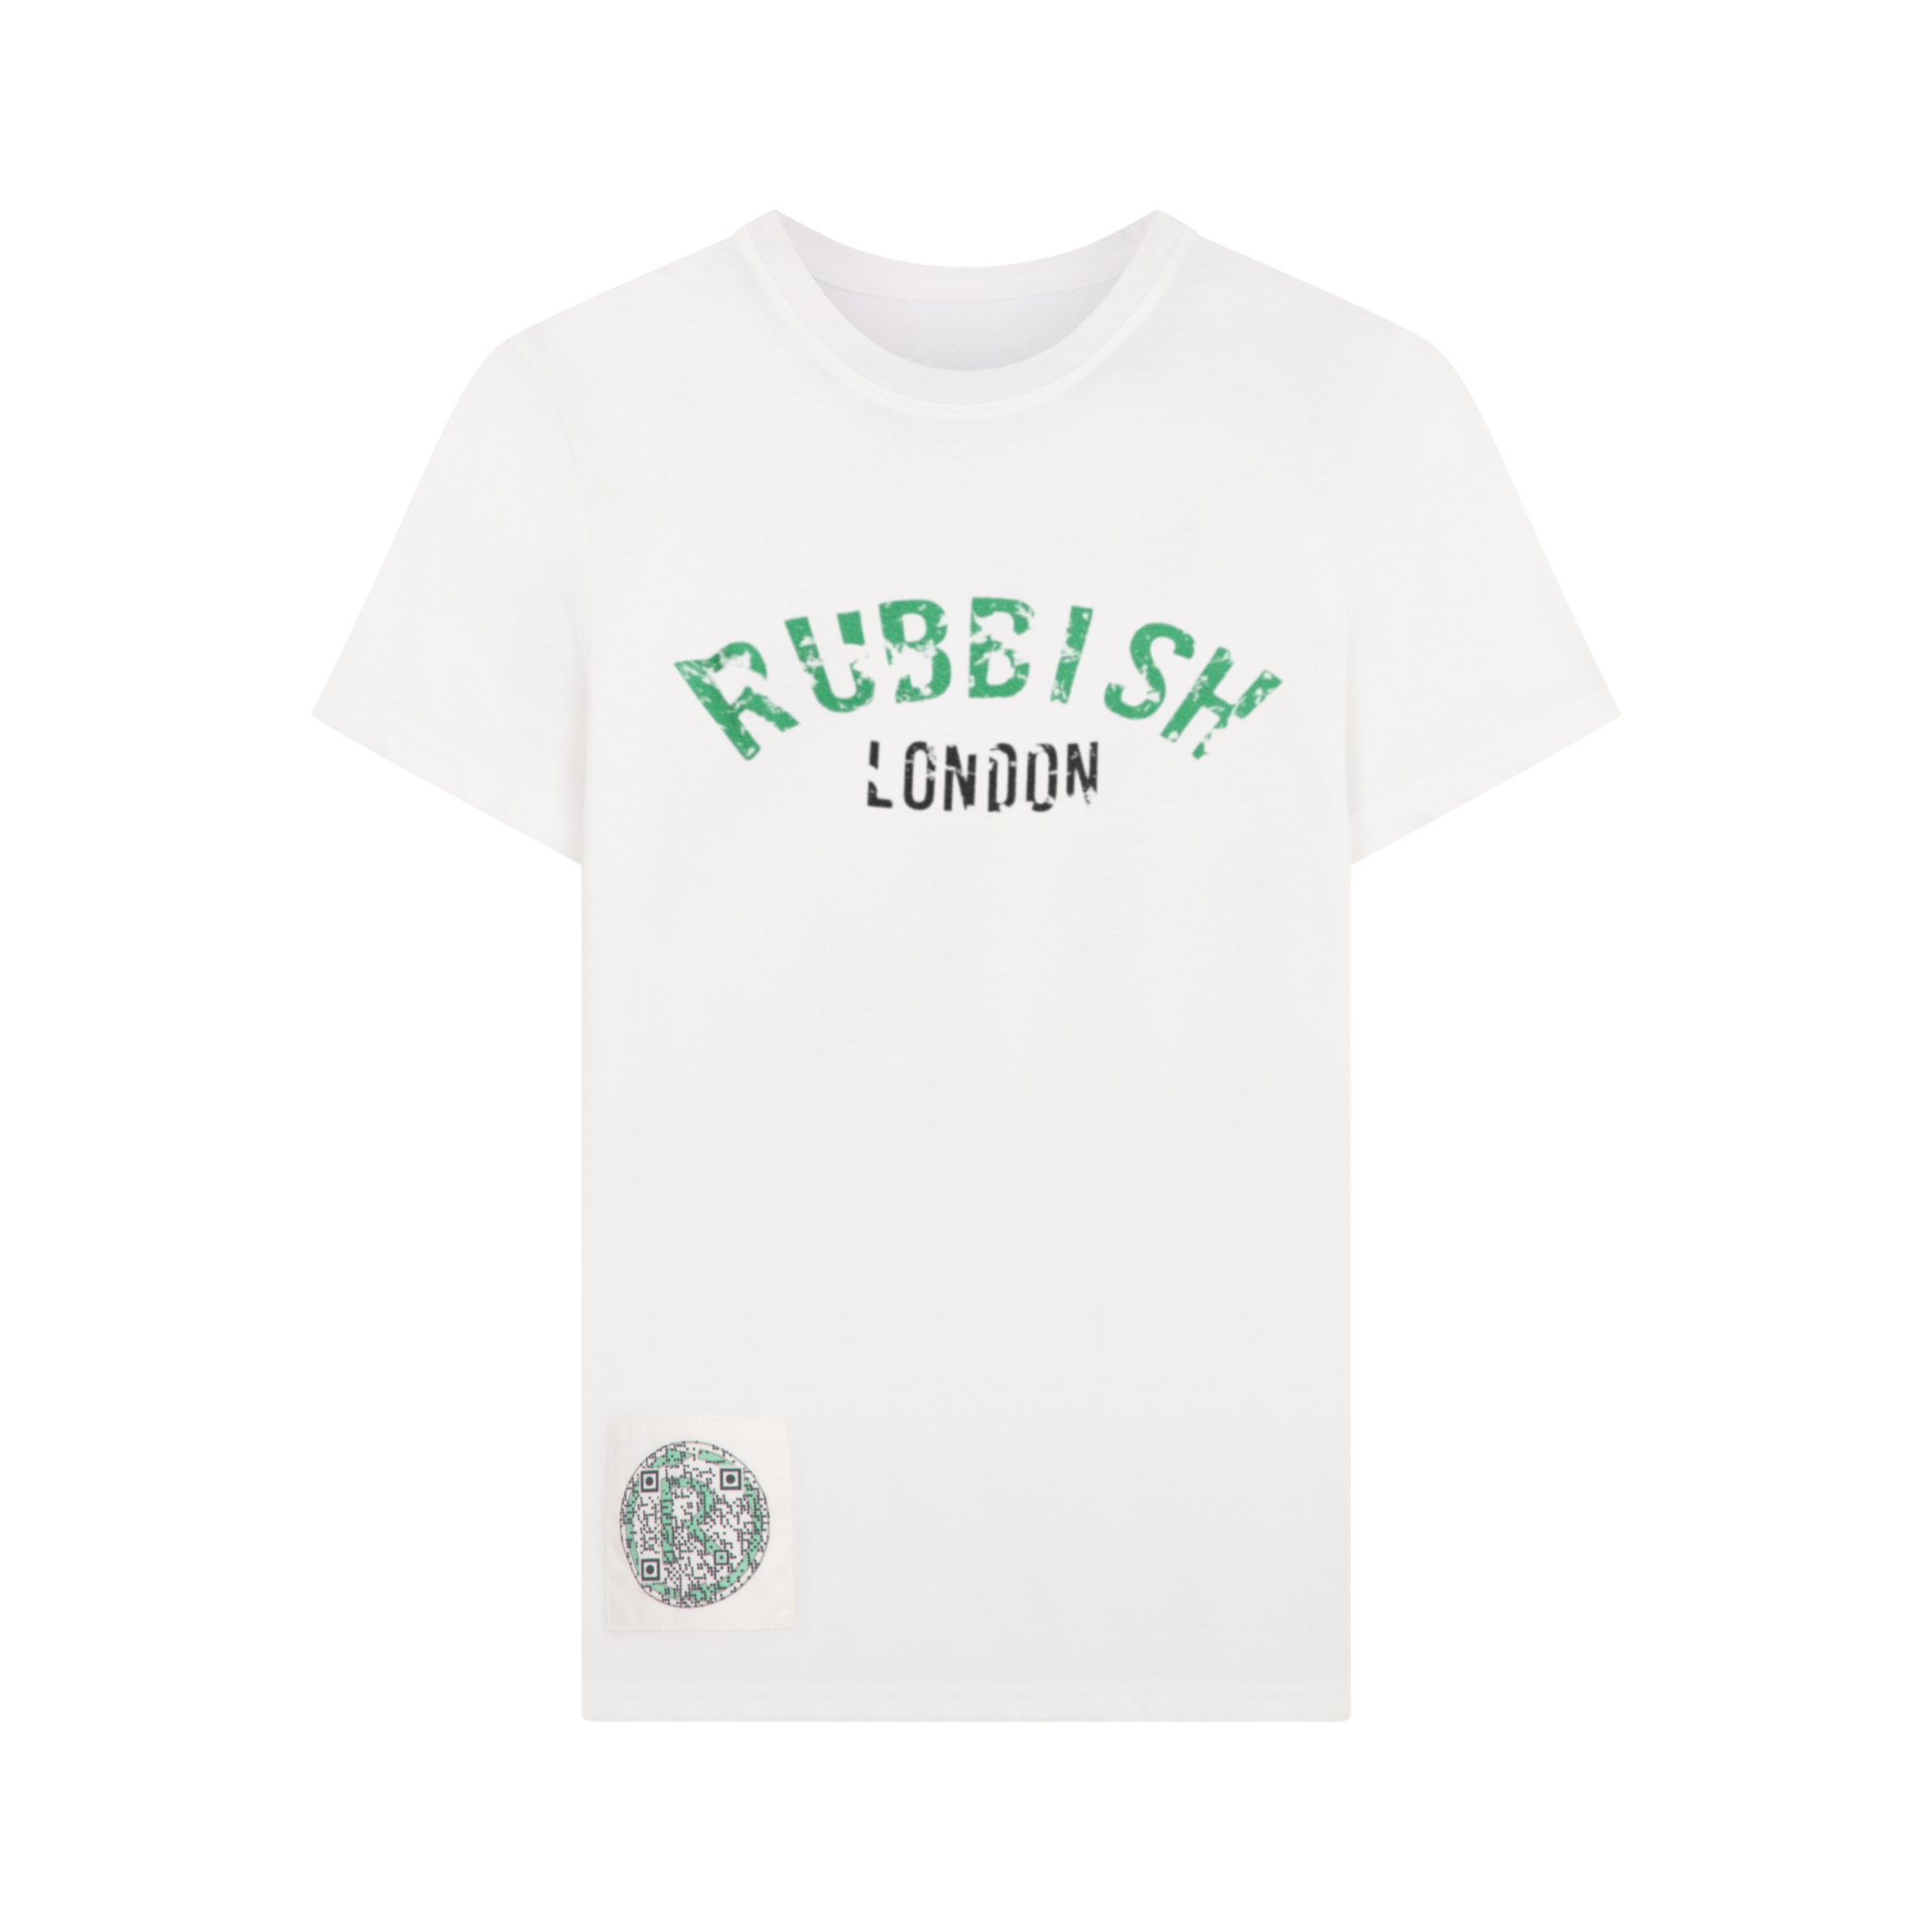 Branded & Distressed premium Recycled Cotton T-Shirt